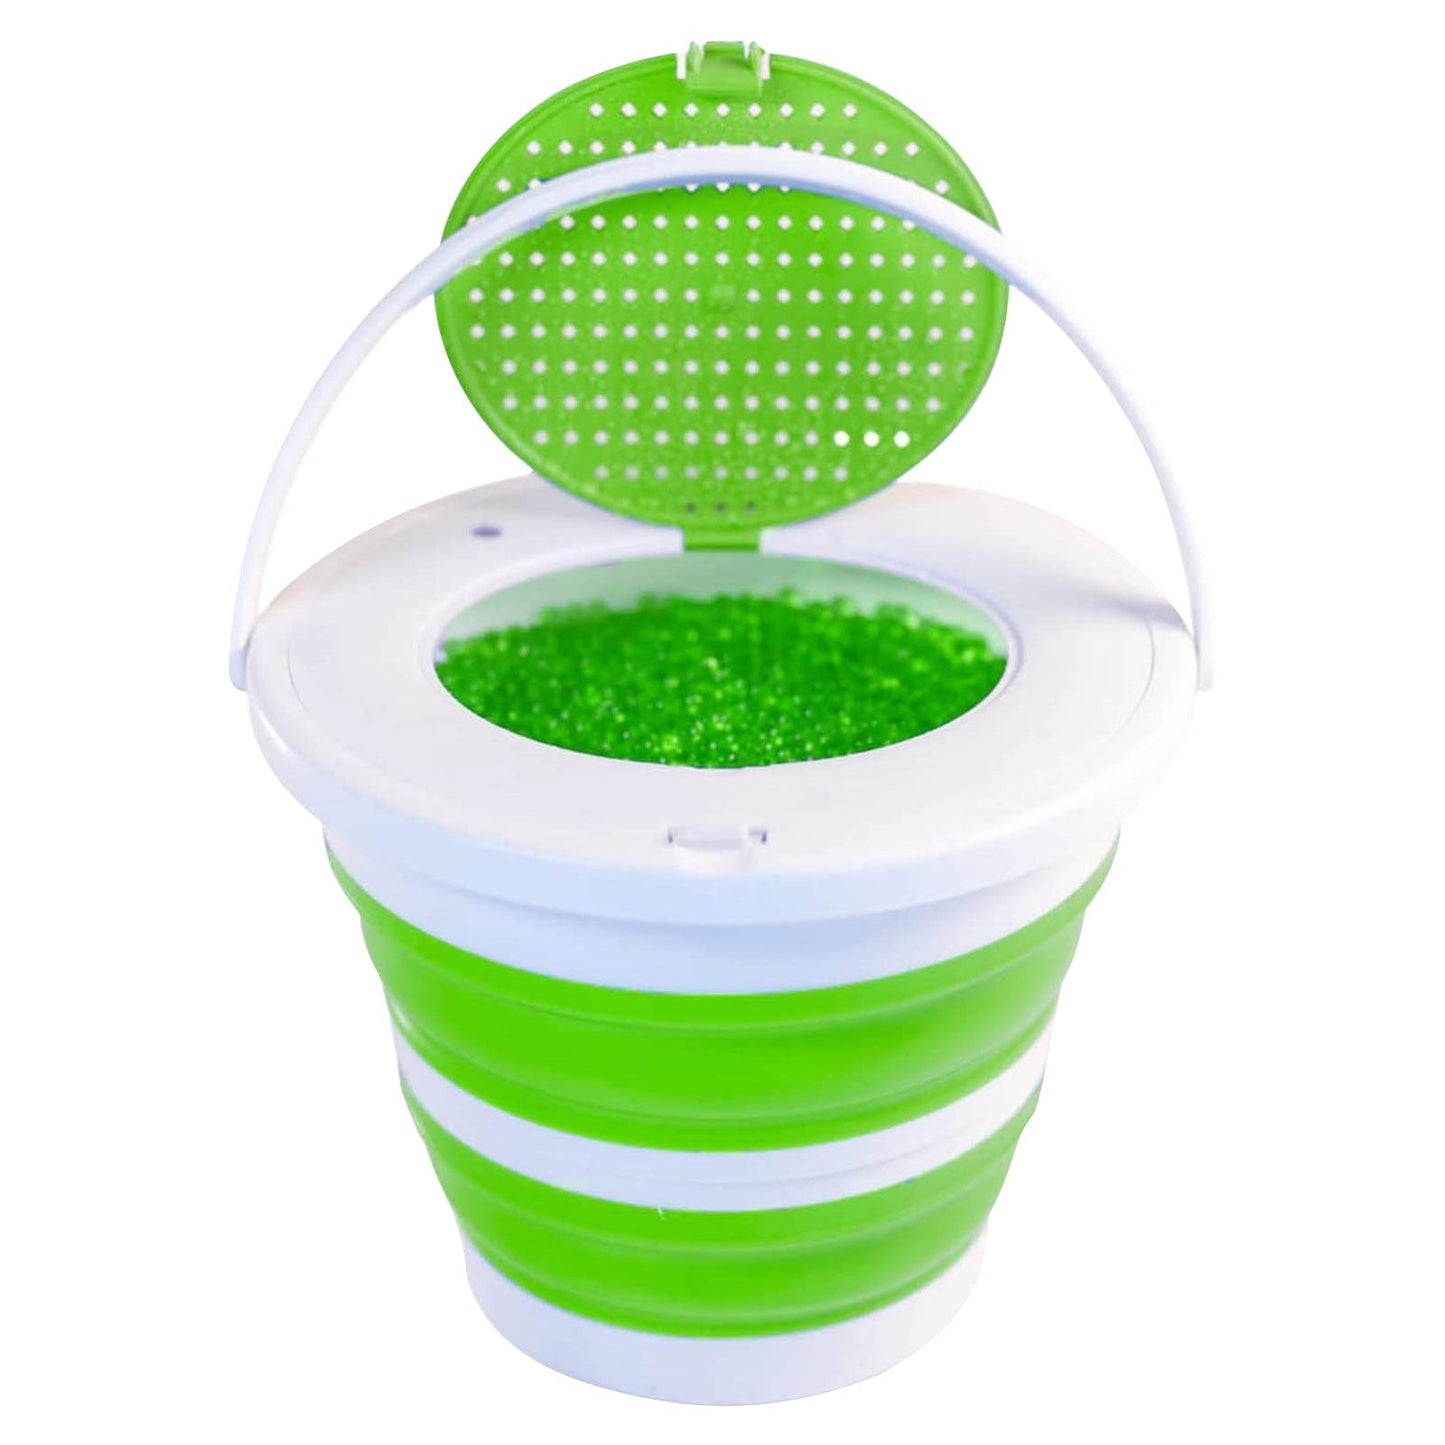 Splatterball Collapsible Ammo Tub with Lid